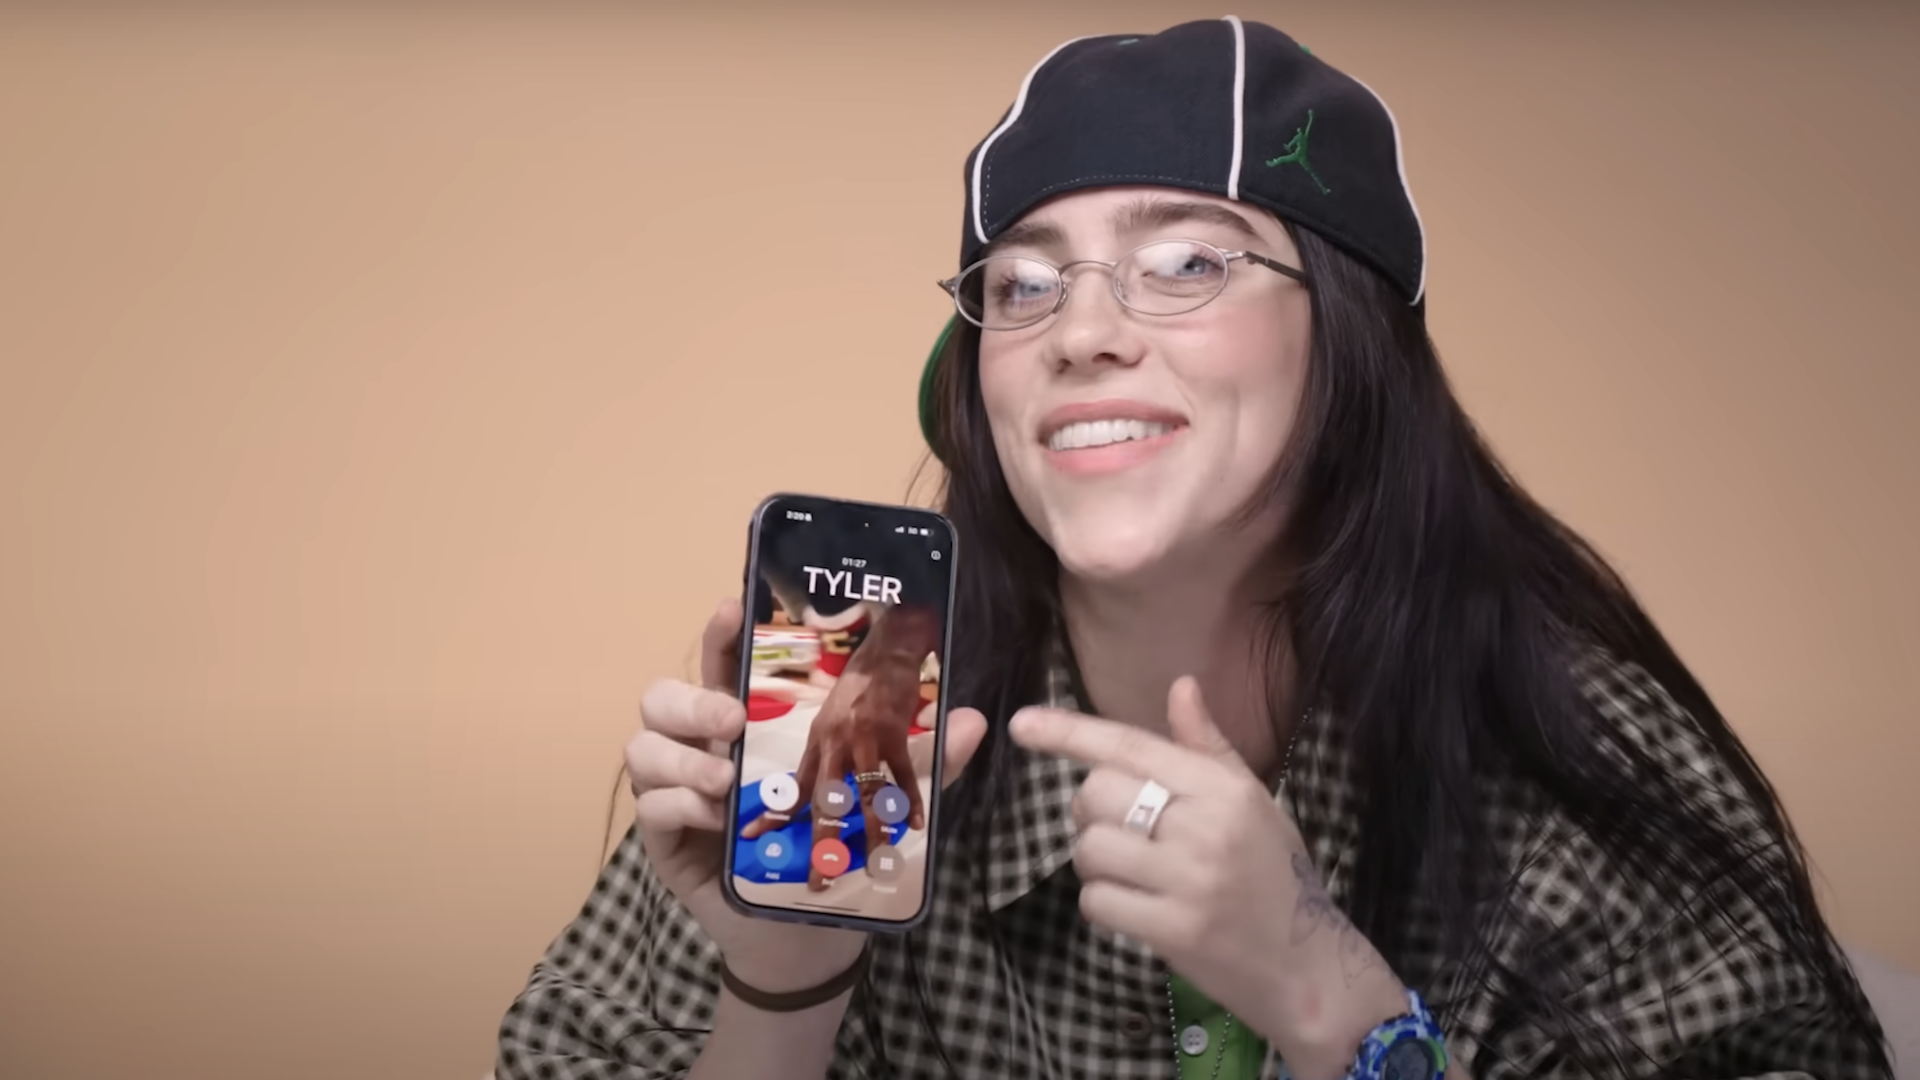 Watch Billie Eilish Prank Call Tyler, The Creator, Tell Him She Pooped Her Pants on First Date